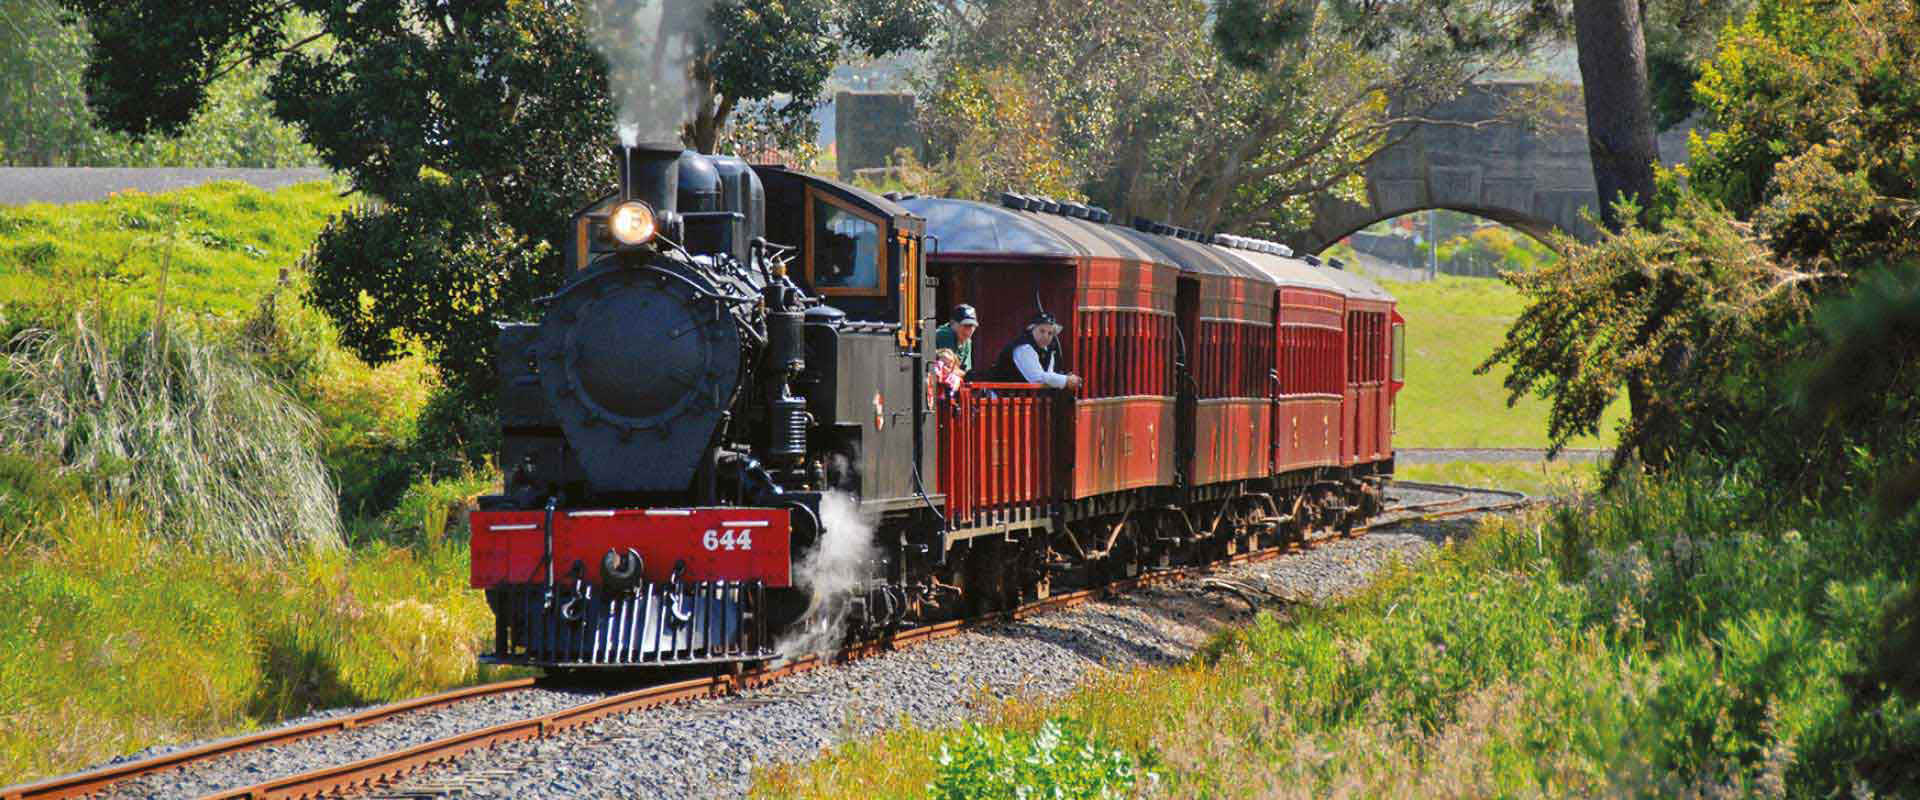 View of Glenbrook Steam Train in North Island, New Zealand